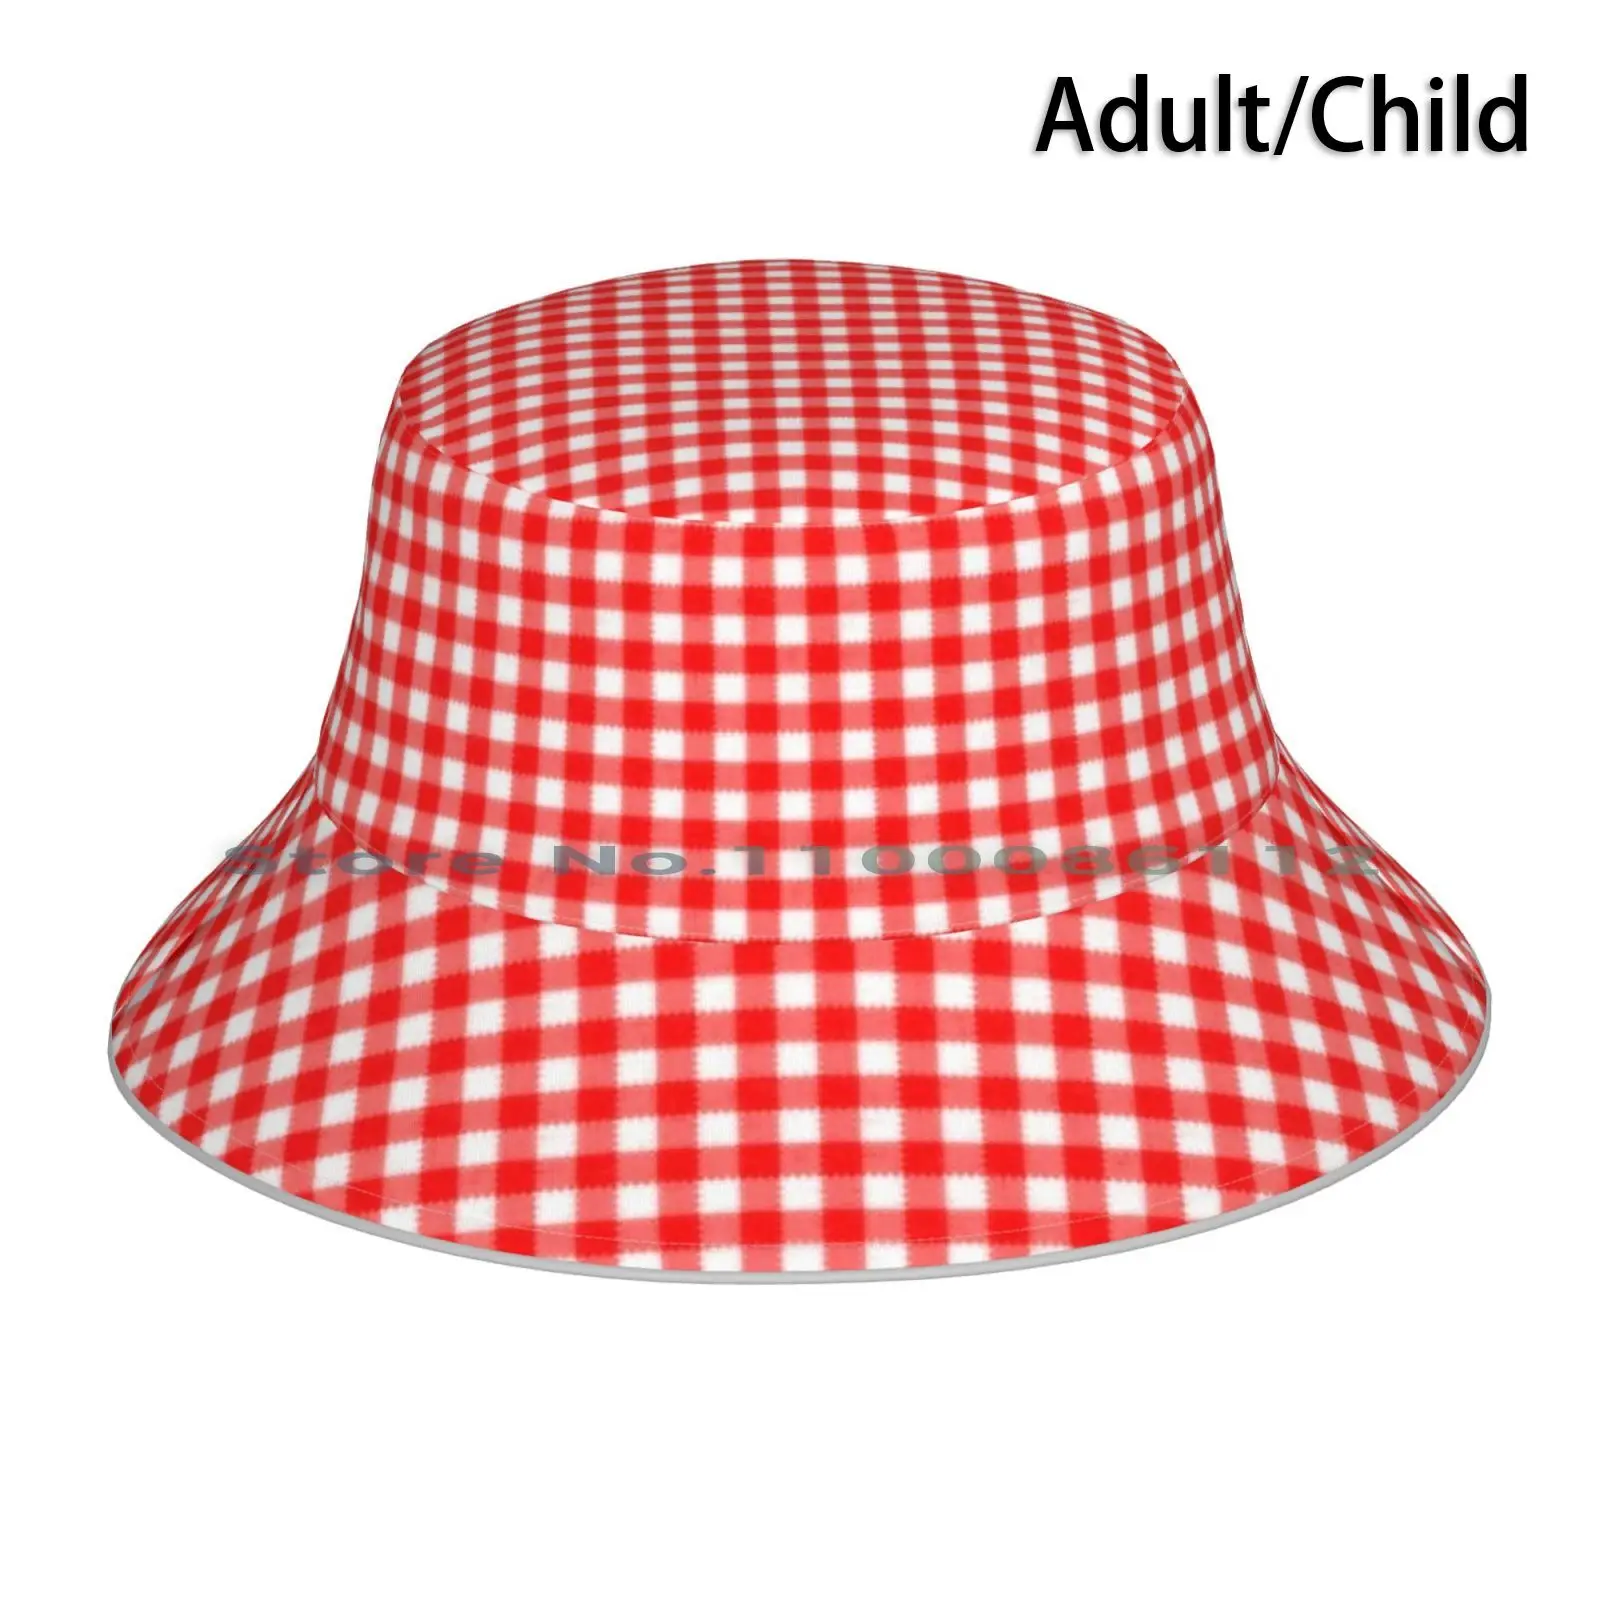 

Gingham Red And White Weave Pattern Bucket Hat Sun Cap Gingham White Weave Pattern Plaid Cloth Textile Effect Chequered Pretty